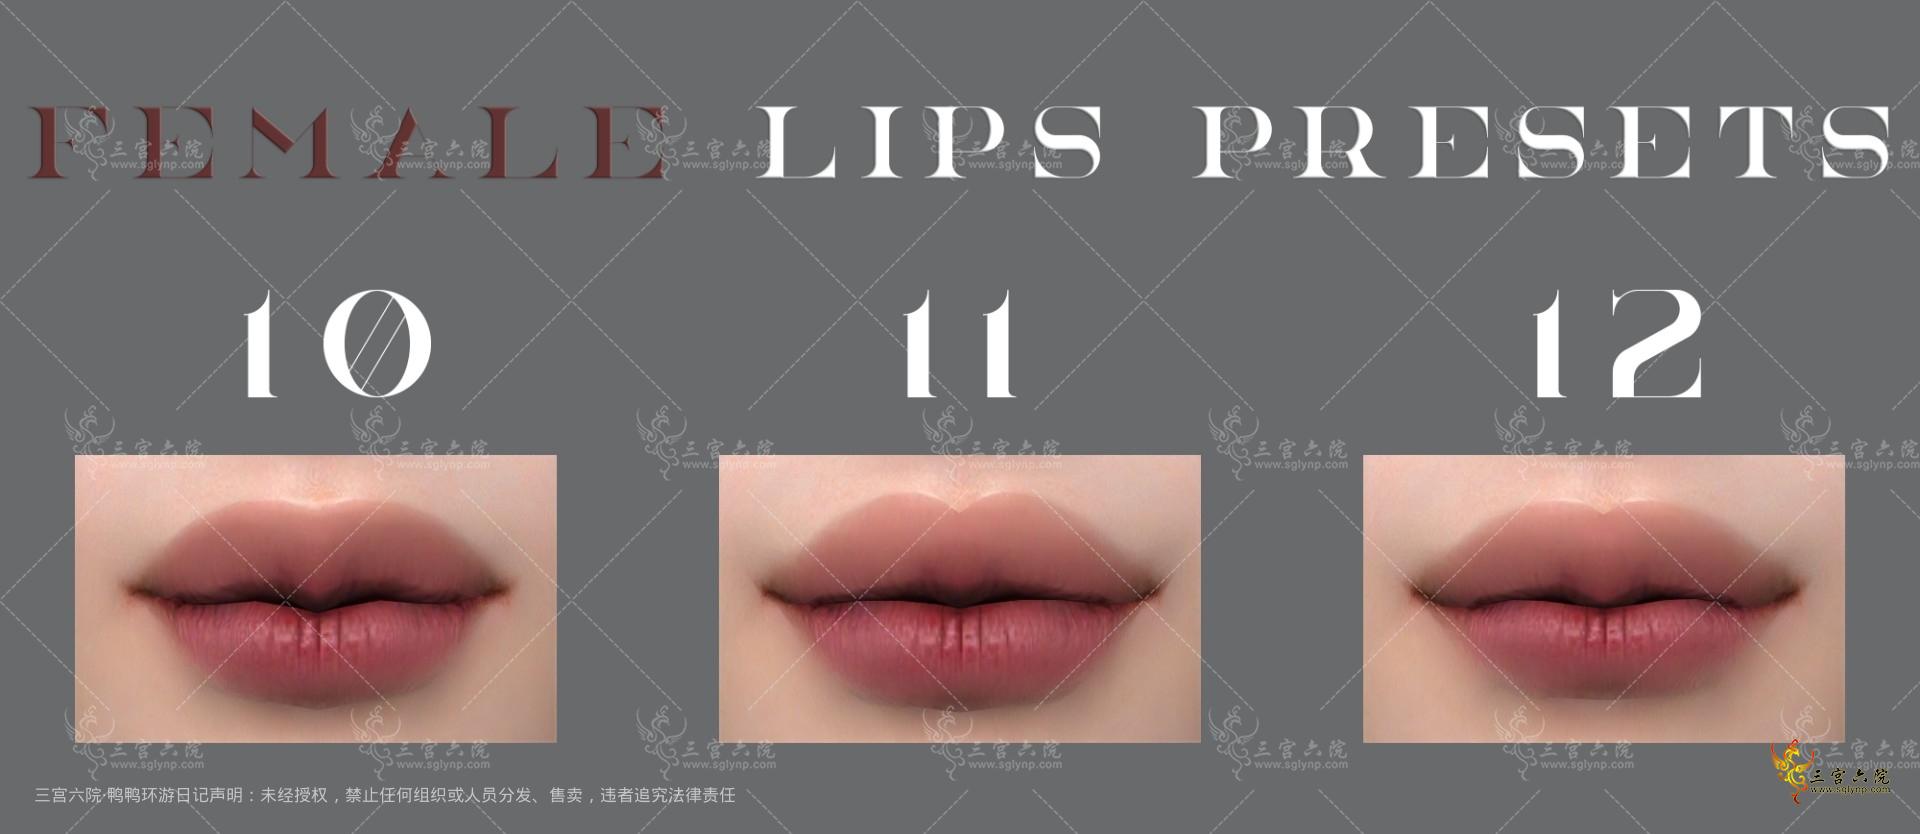 lips presets 10-12.png